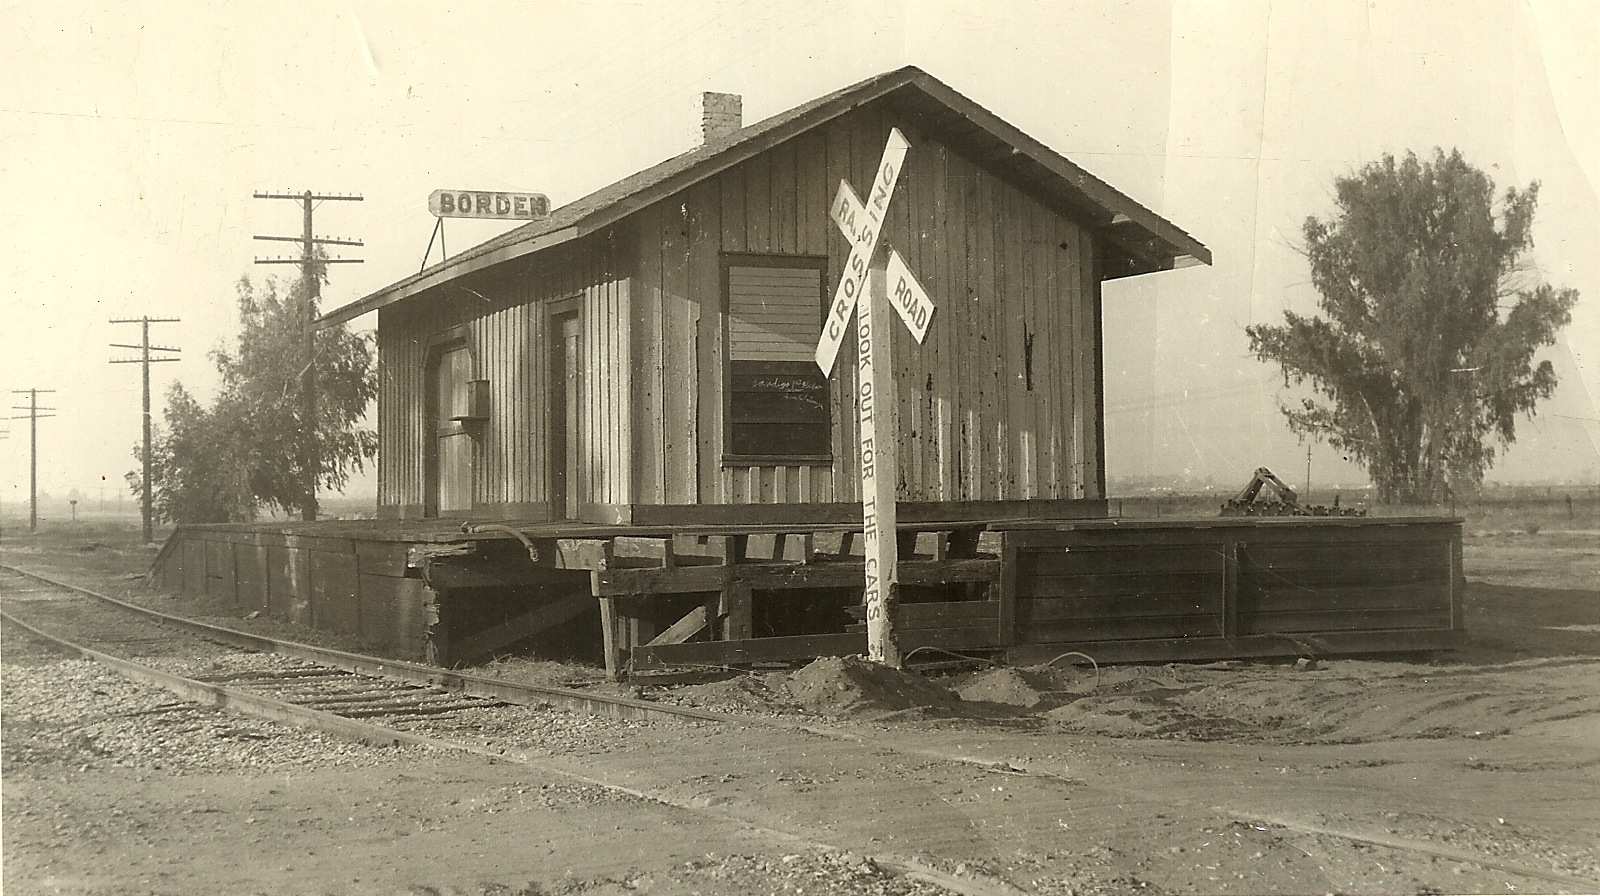 picture of The freight depot for the town of Borden. Passengers also used this depot.